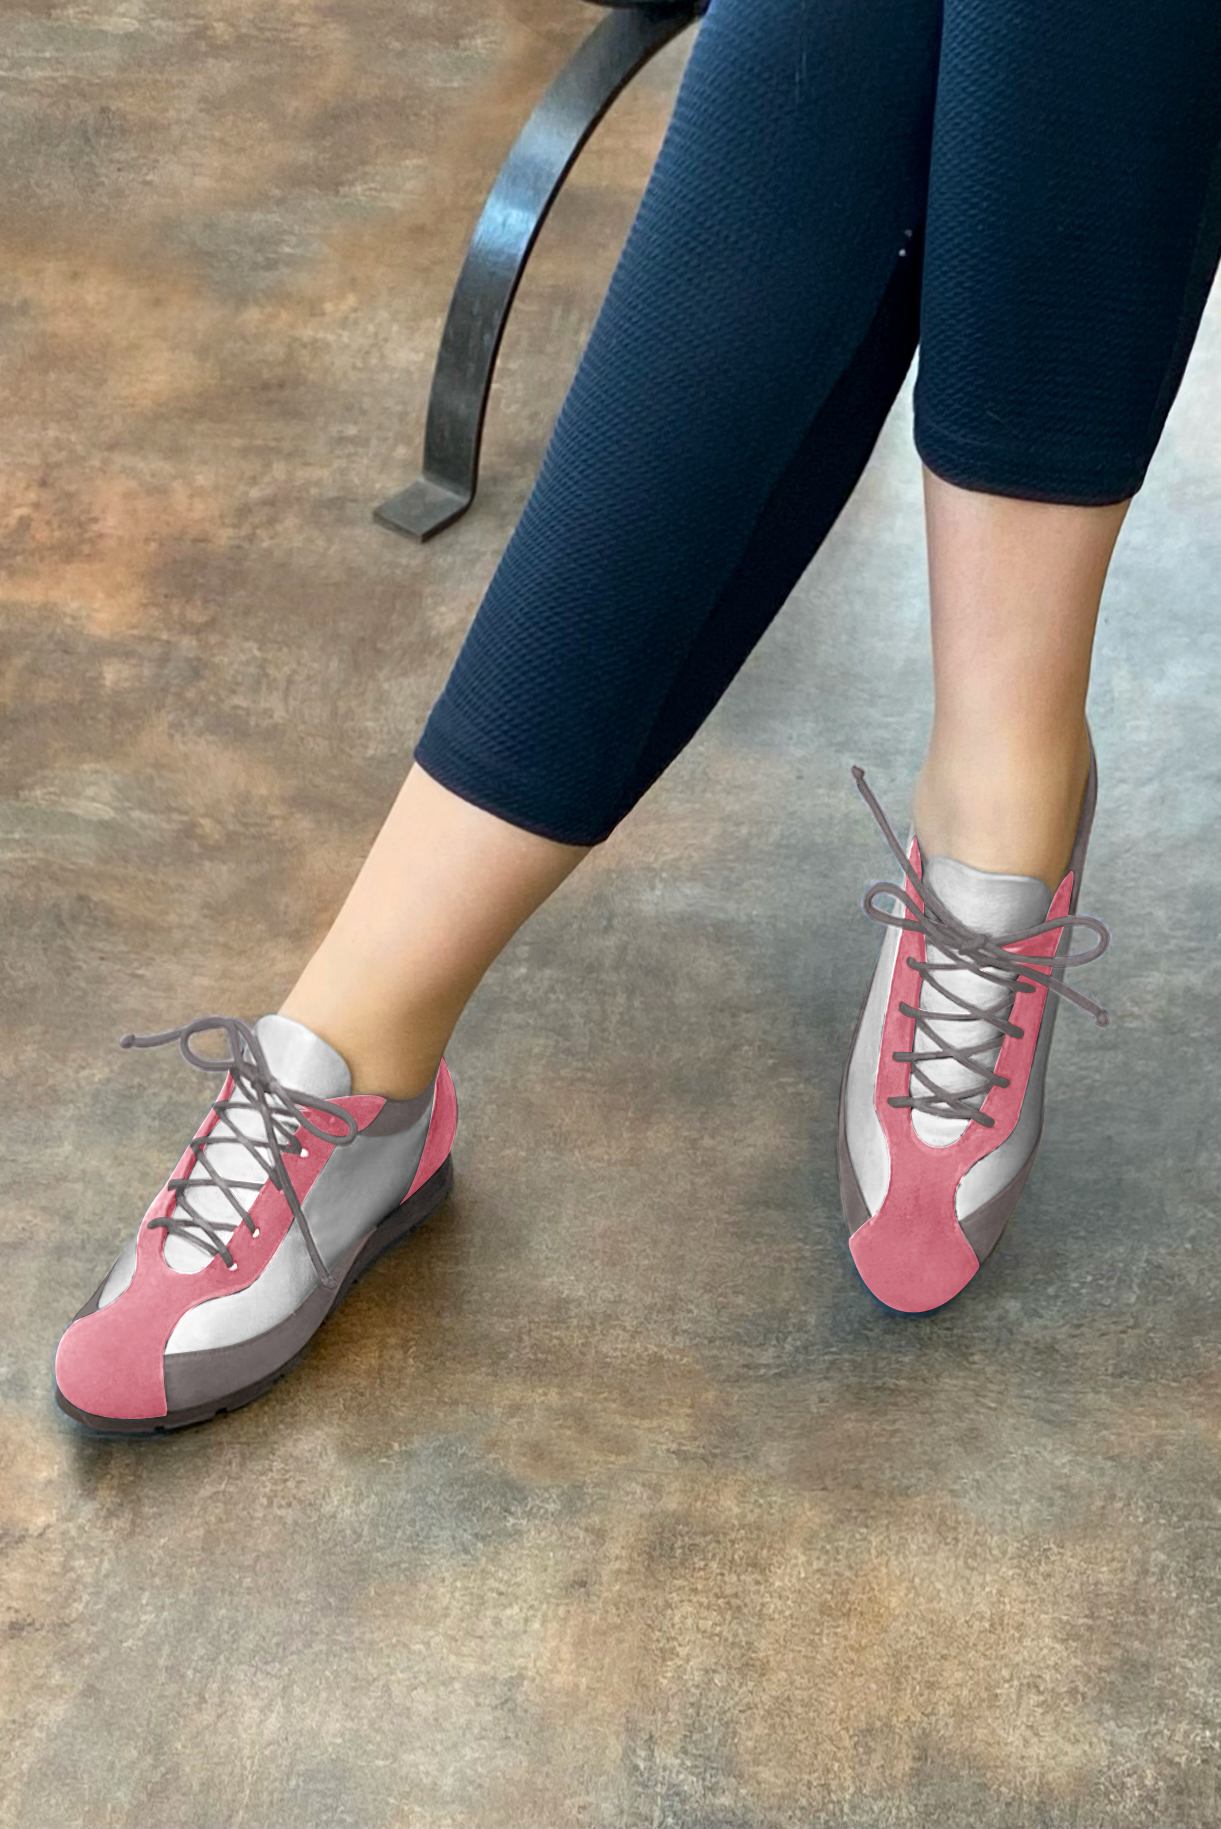 Carnation pink, light silver and pebble grey women's two-tone elegant sneakers. Round toe. Flat rubber soles. Worn view - Florence KOOIJMAN